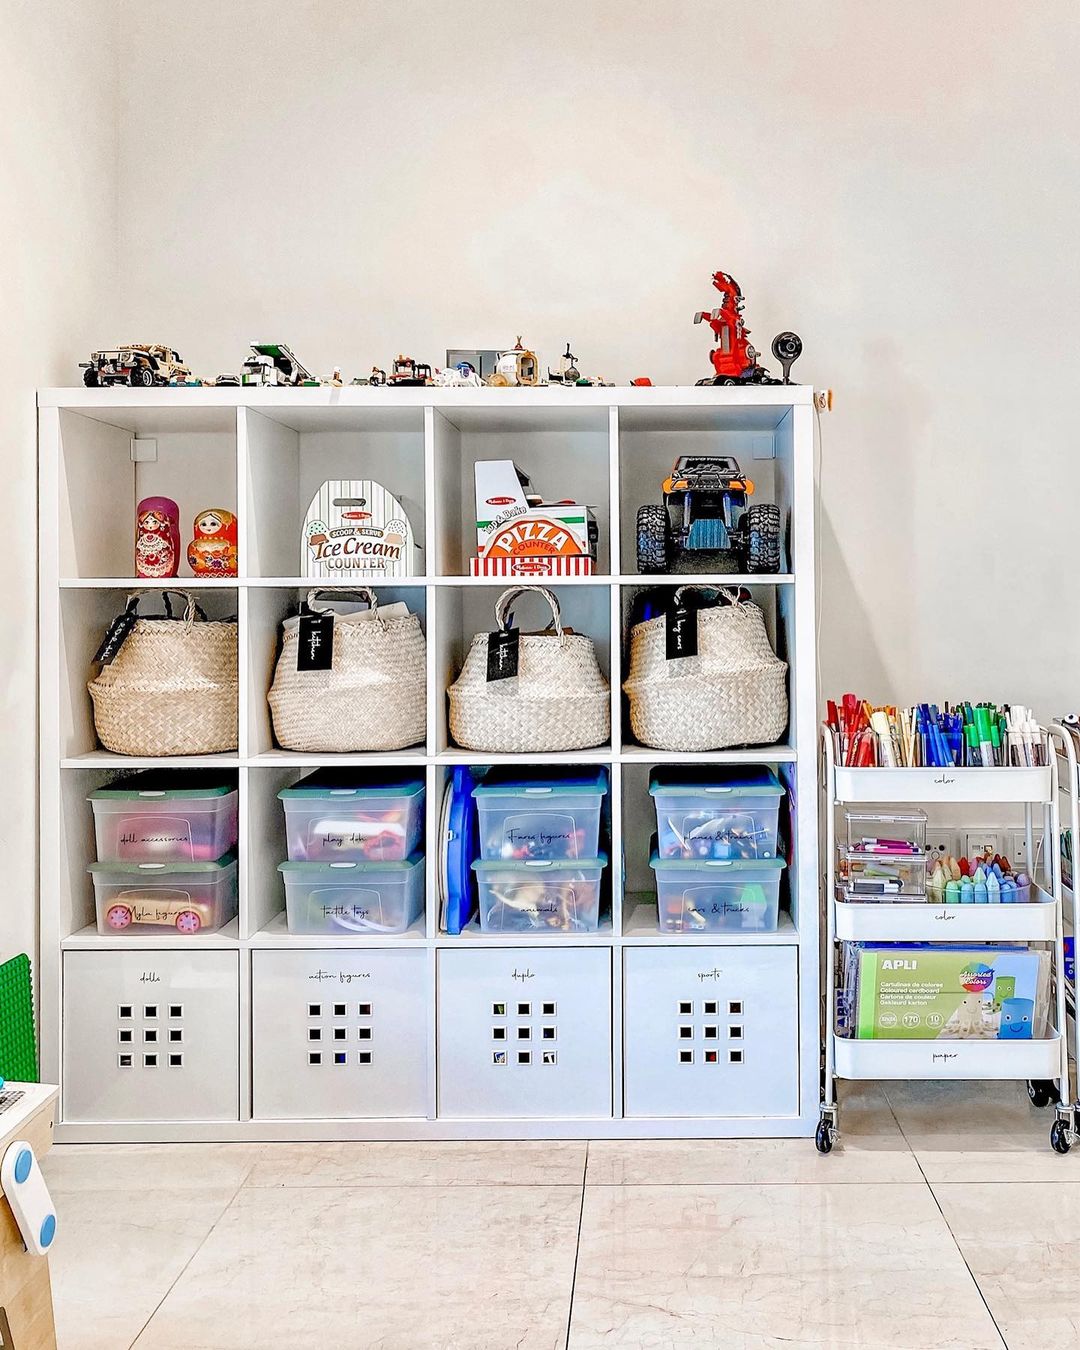 Small Storage Cubbies with Toys off of the Flood. Photo by Instagram user @thesavvyspace